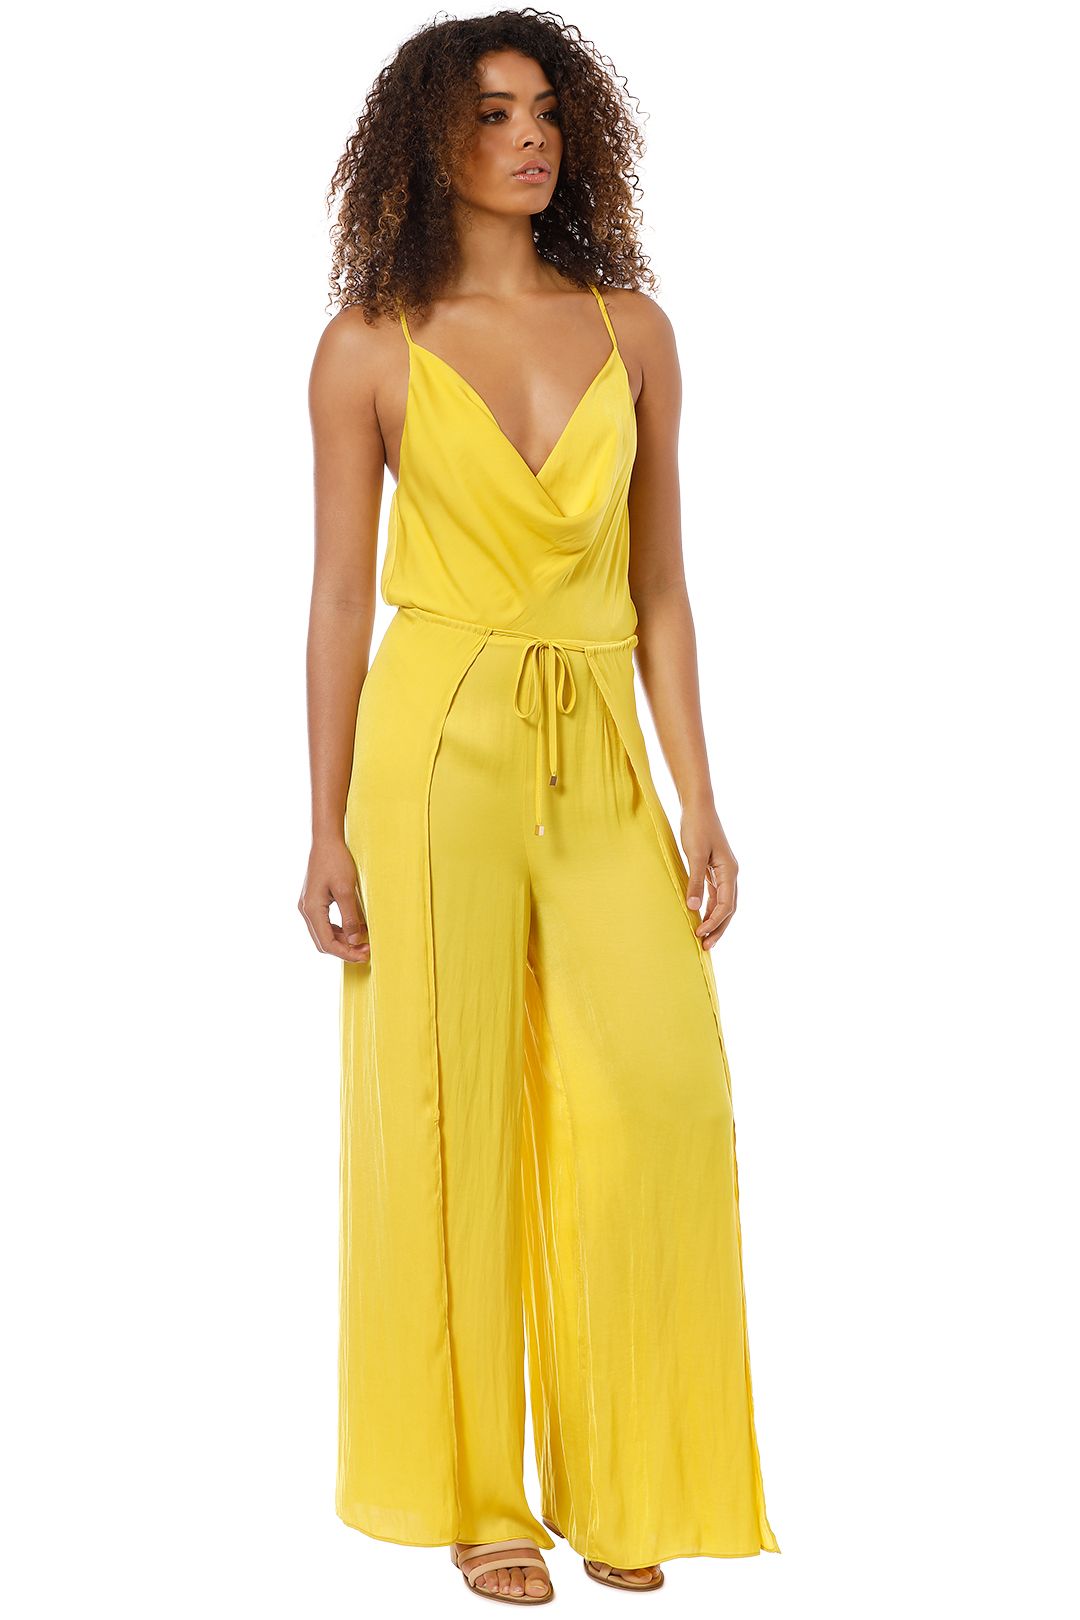 Sheike - Kiss and Tell Jumpsuit - Yellow Mustard - Side